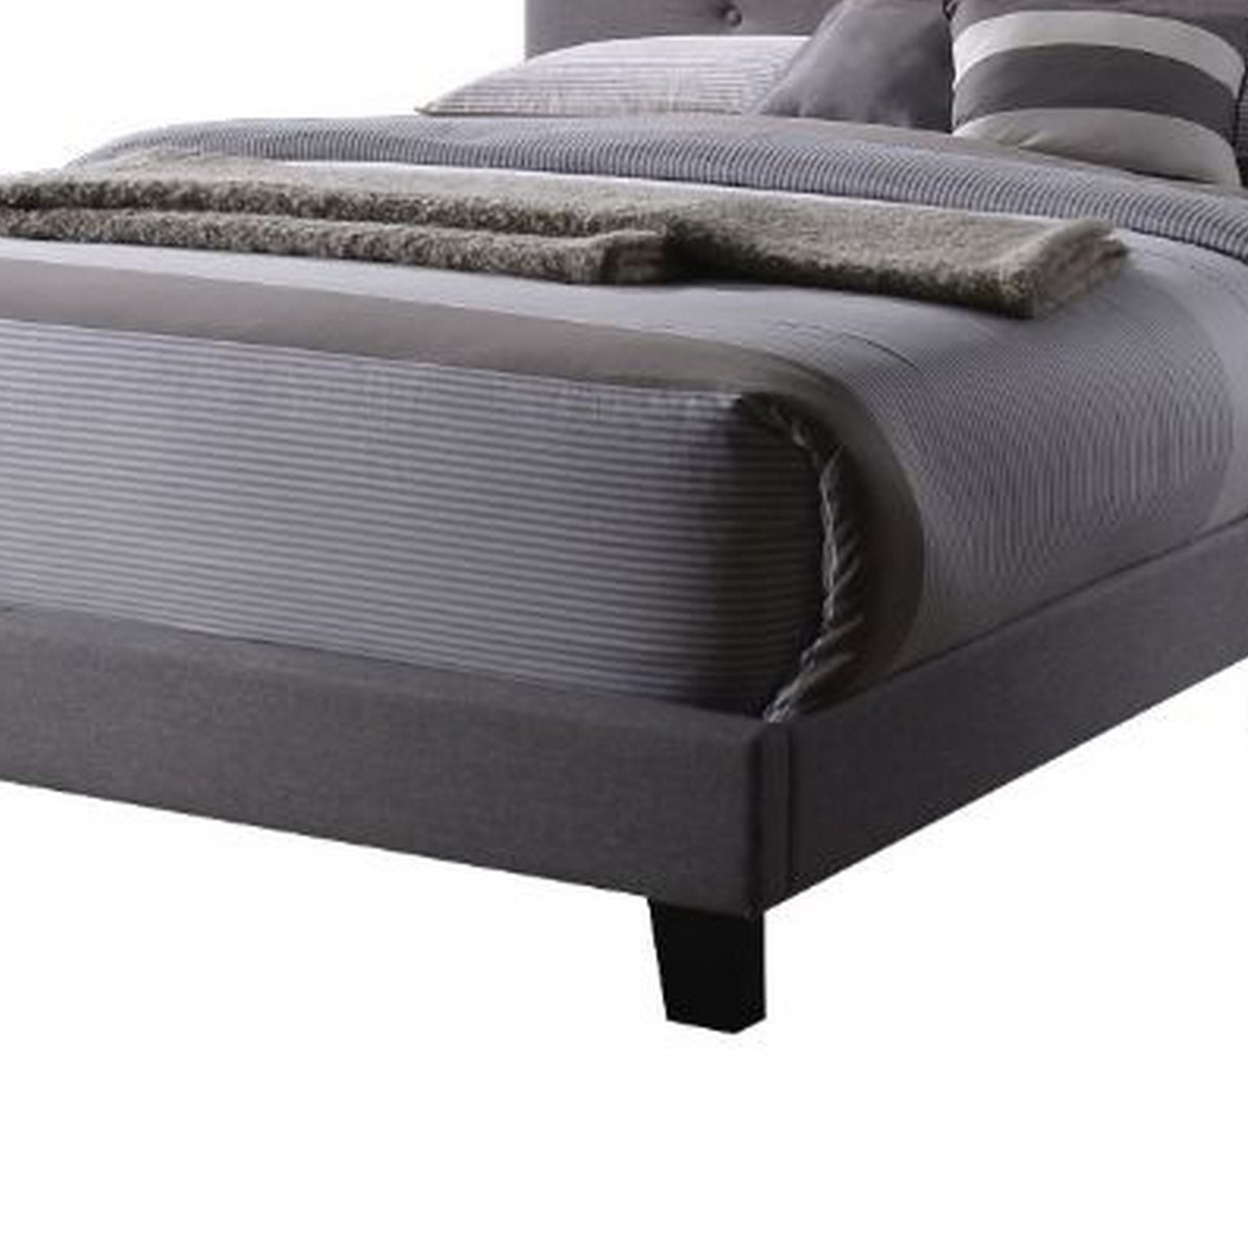 Luxurious Contemporary Style Upholstered Queen Bed, Grey- Saltoro Sherpi